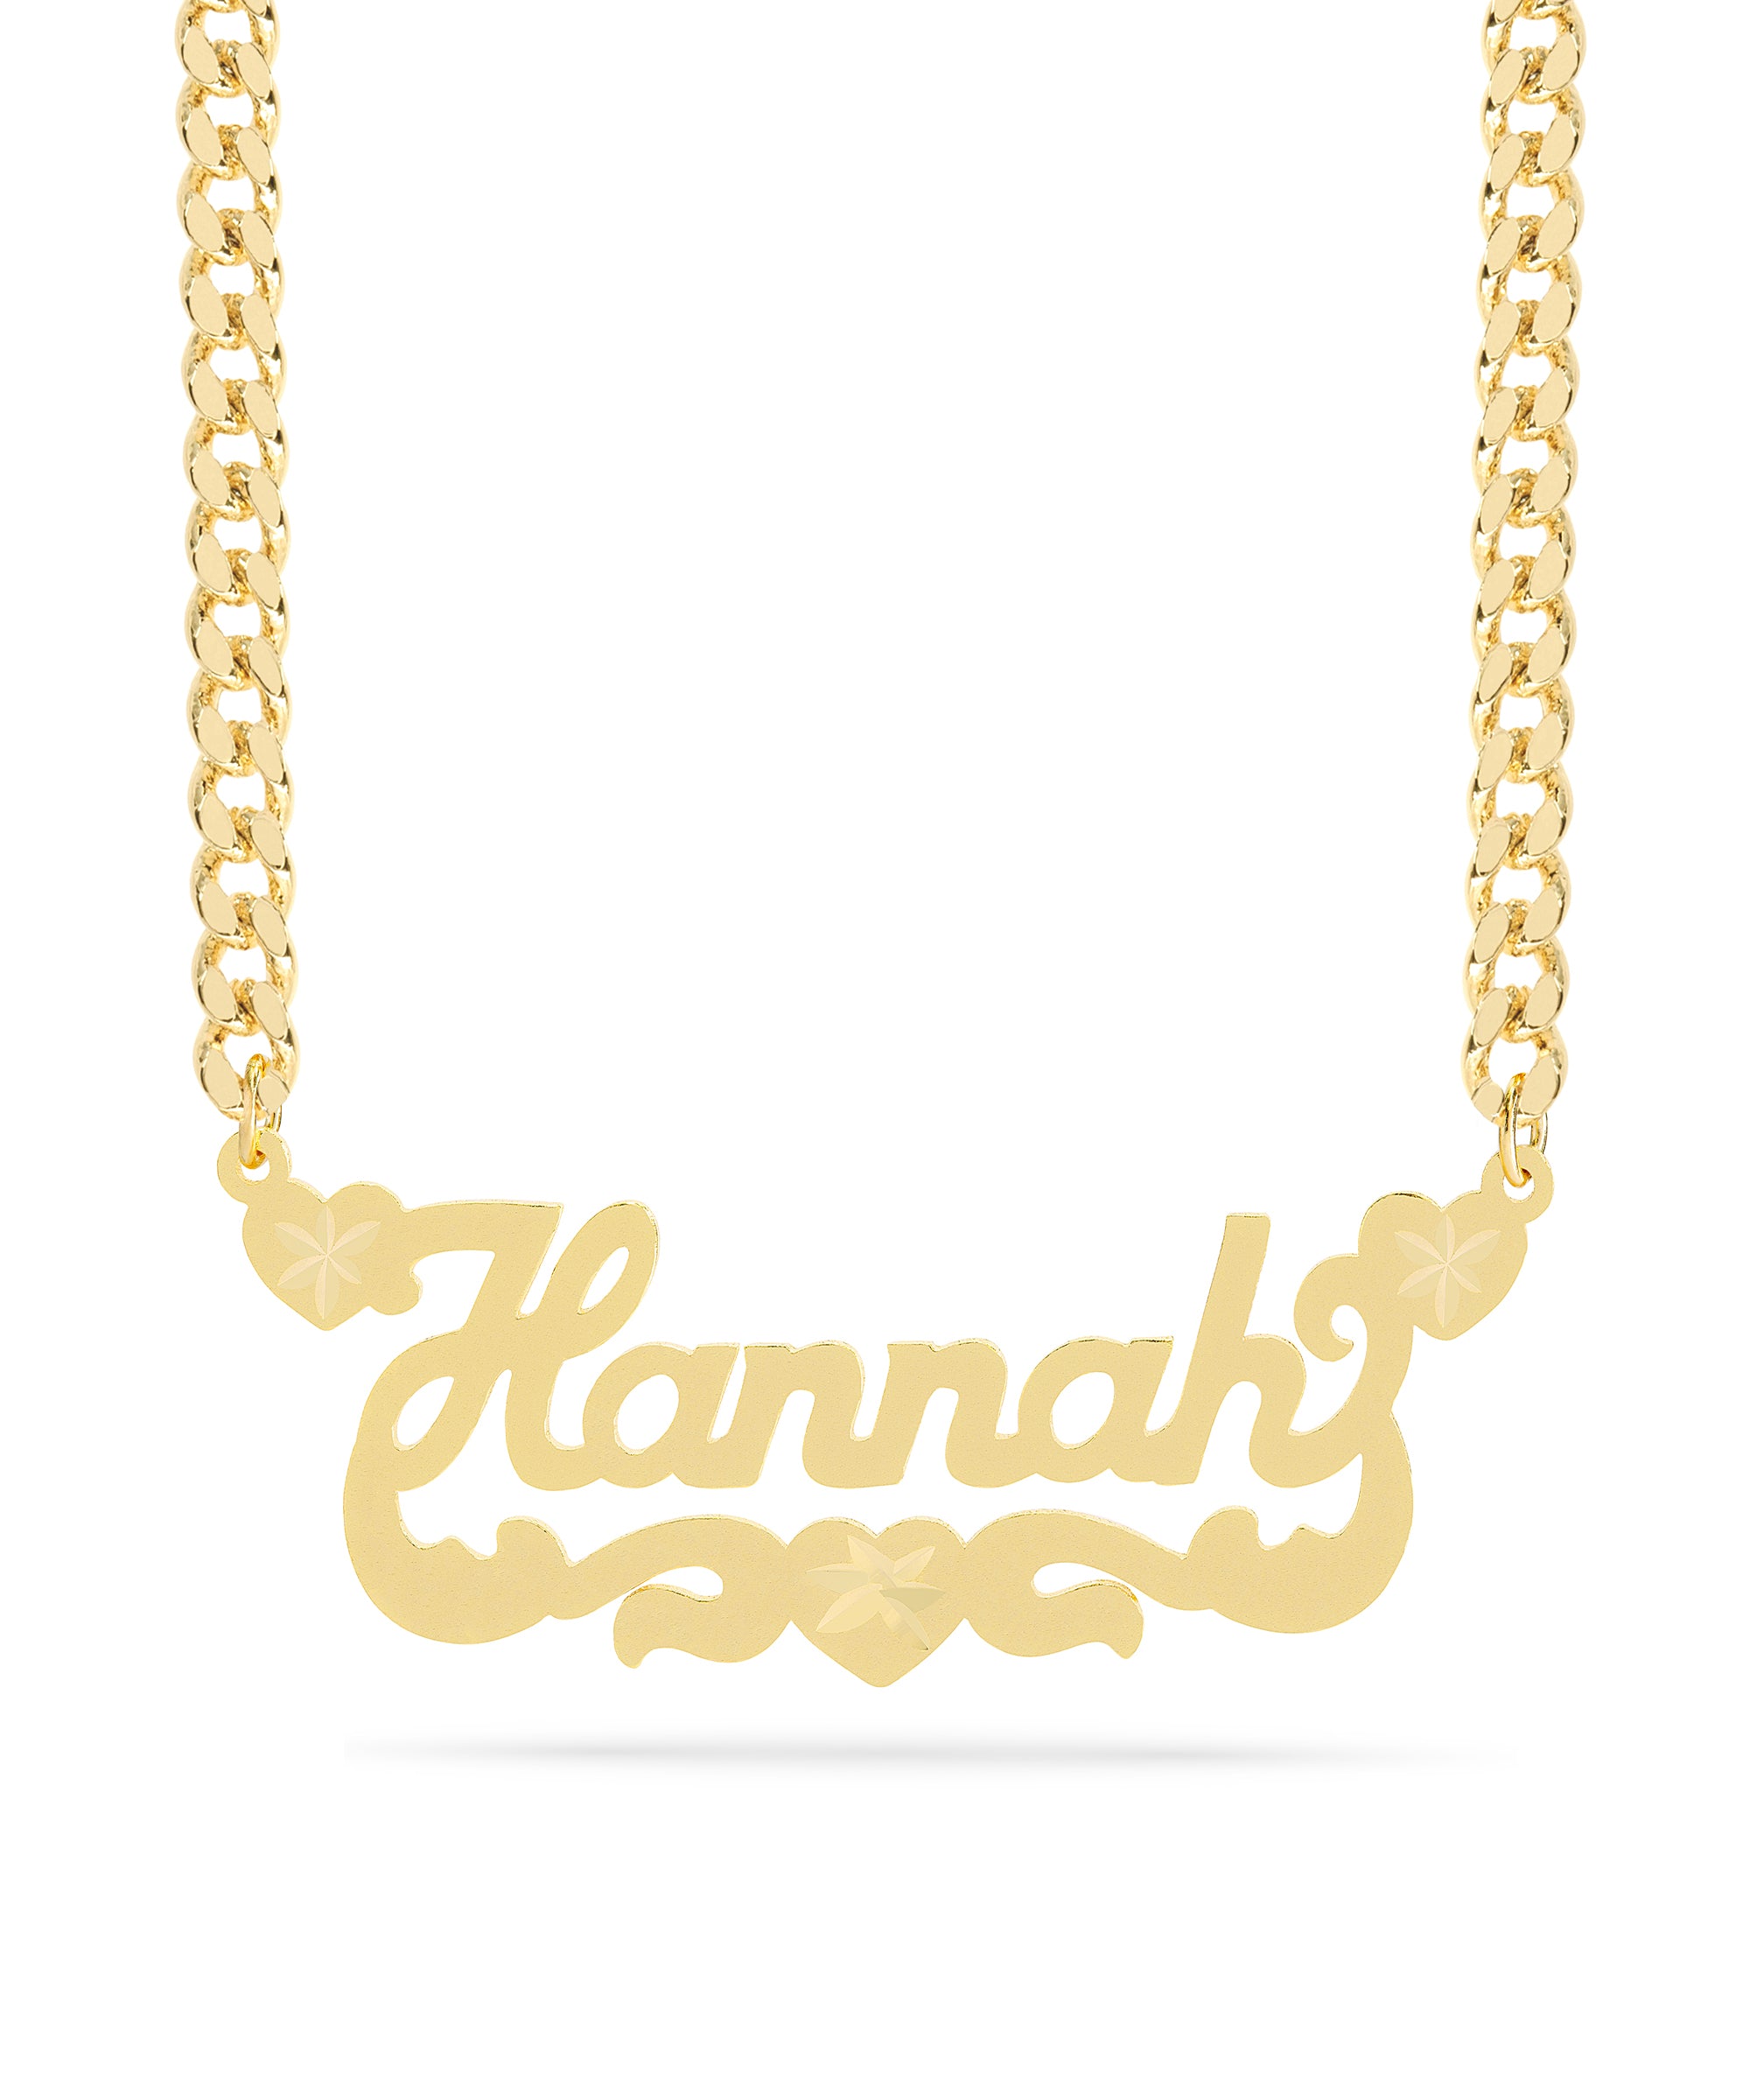 Personalized Name necklace with Satin and Heart "Hannah"